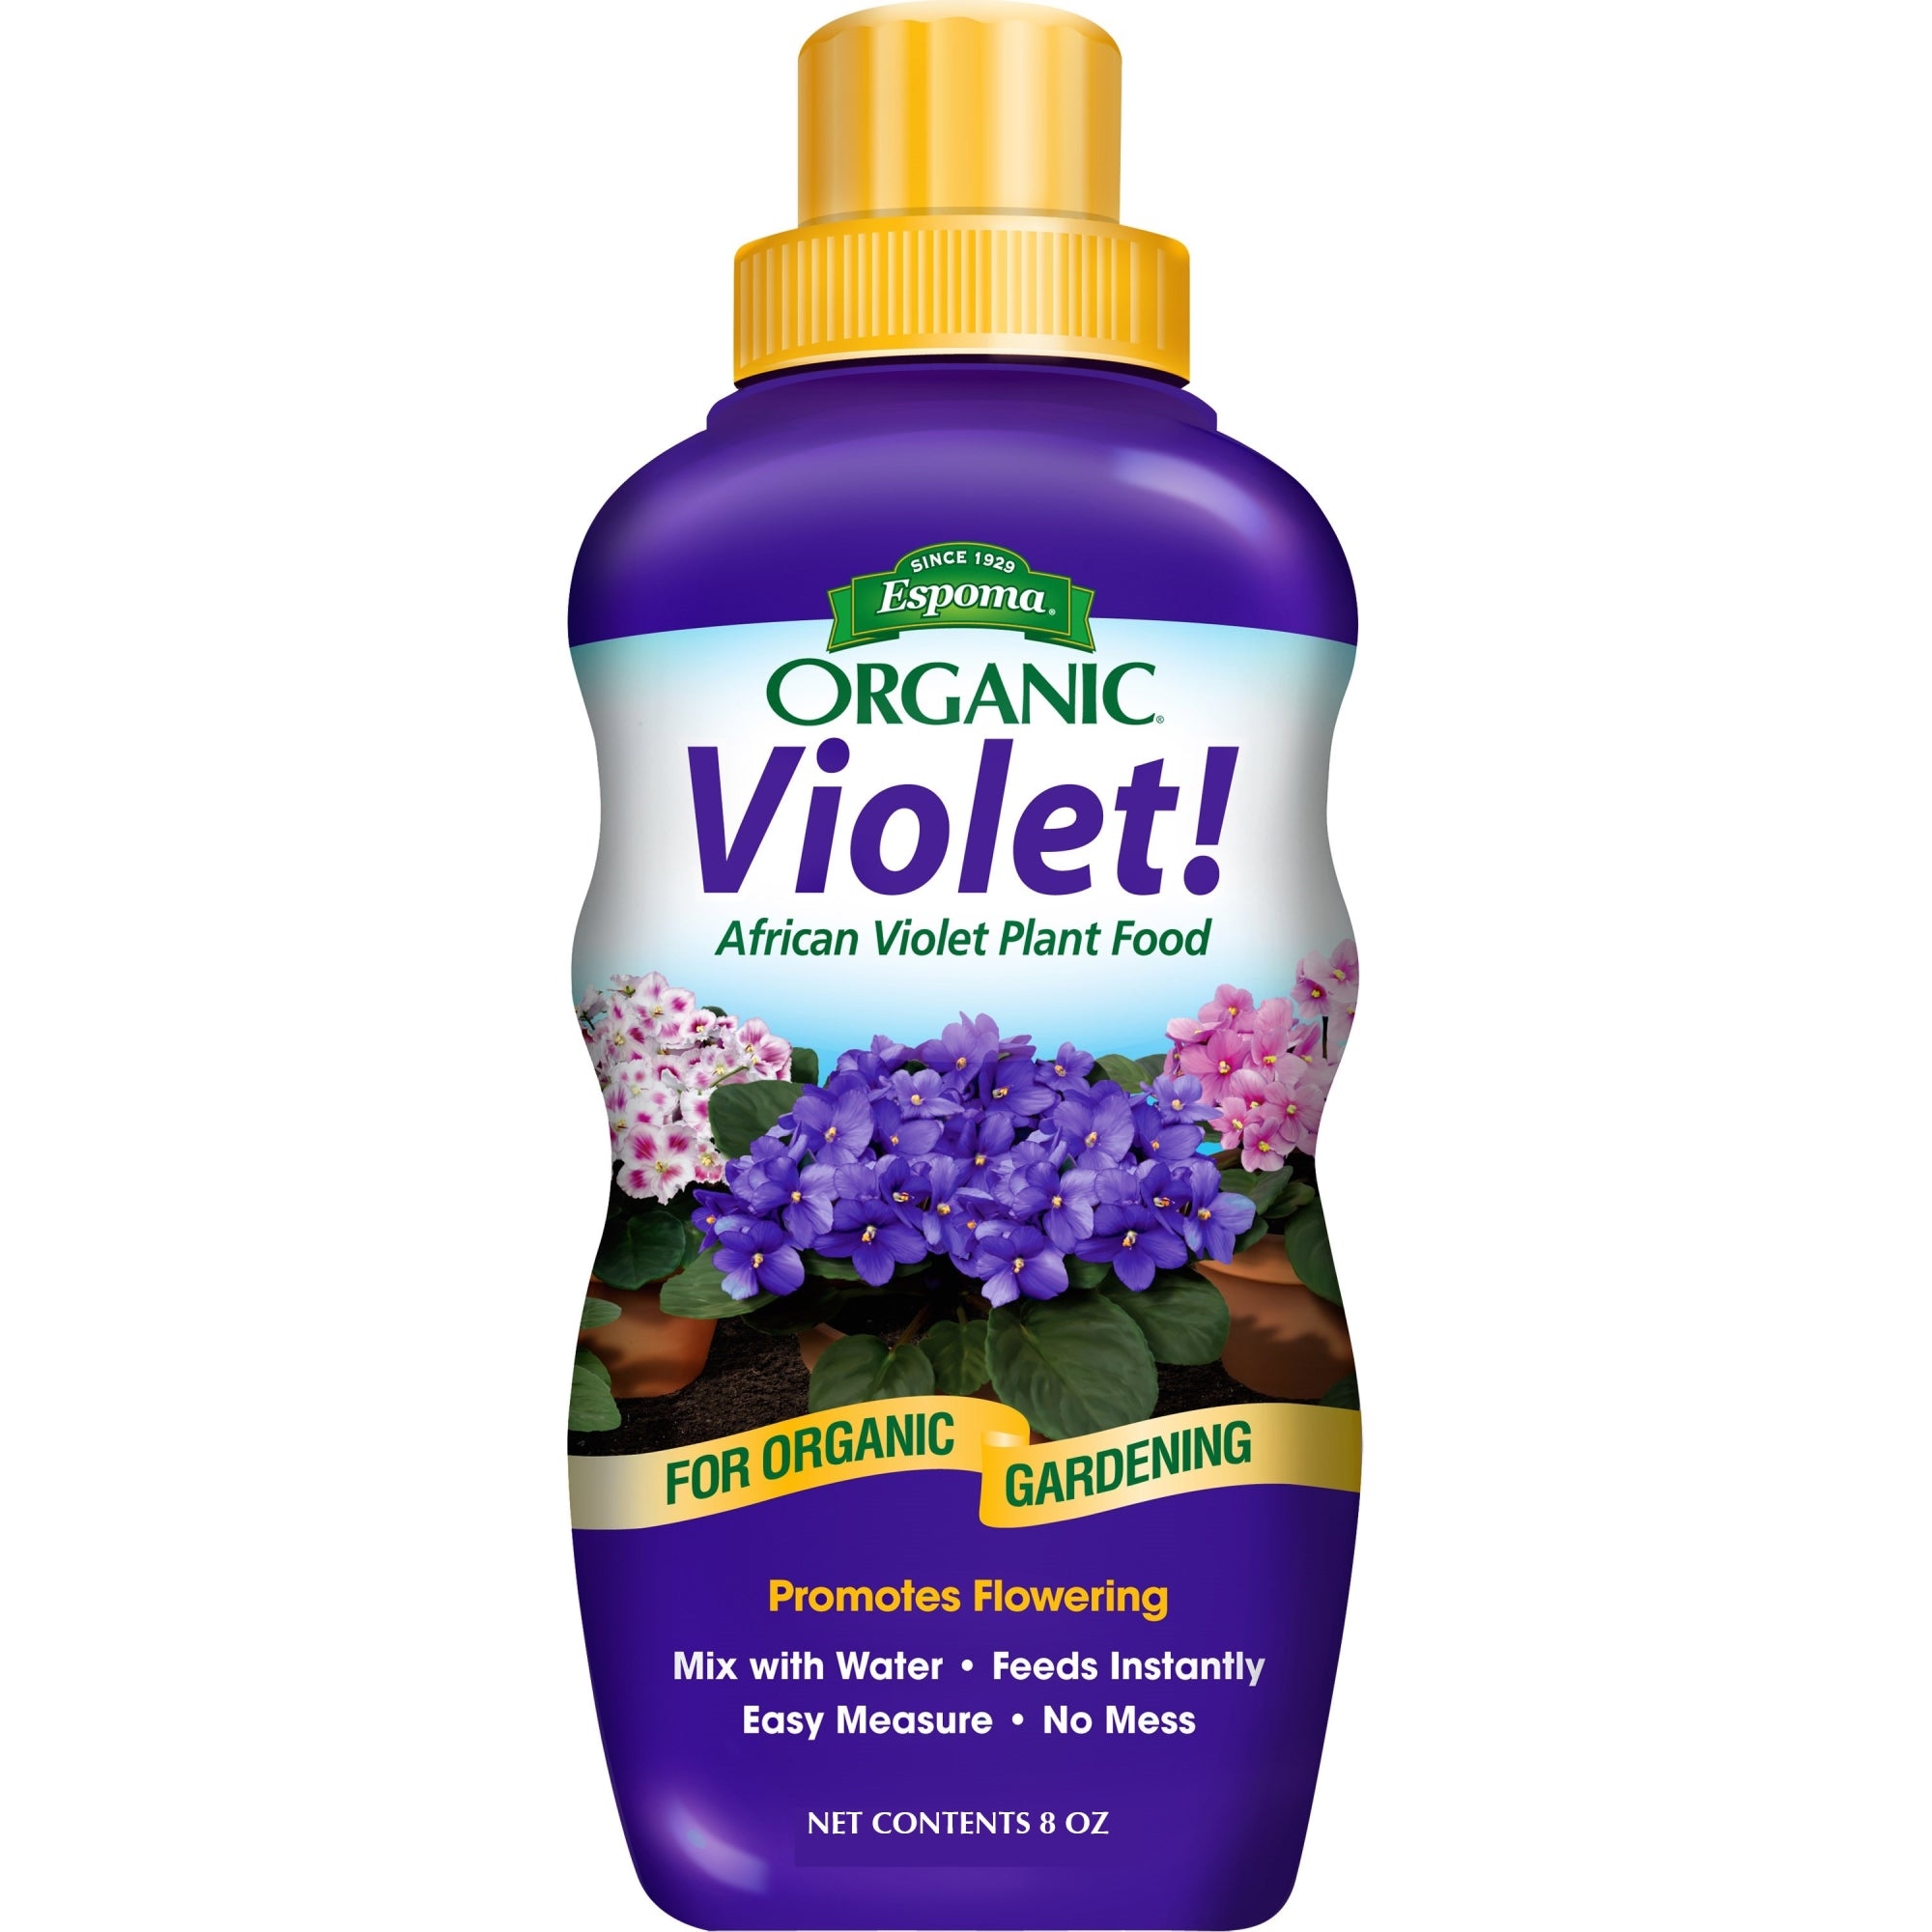 Espoma Organic Violet! Plant Food and Bloom Booster for All Violets and Indoor Flowering Plants, Promotes Vigorous Growth and Blooming, Liquid Concentrate, 8 fl oz